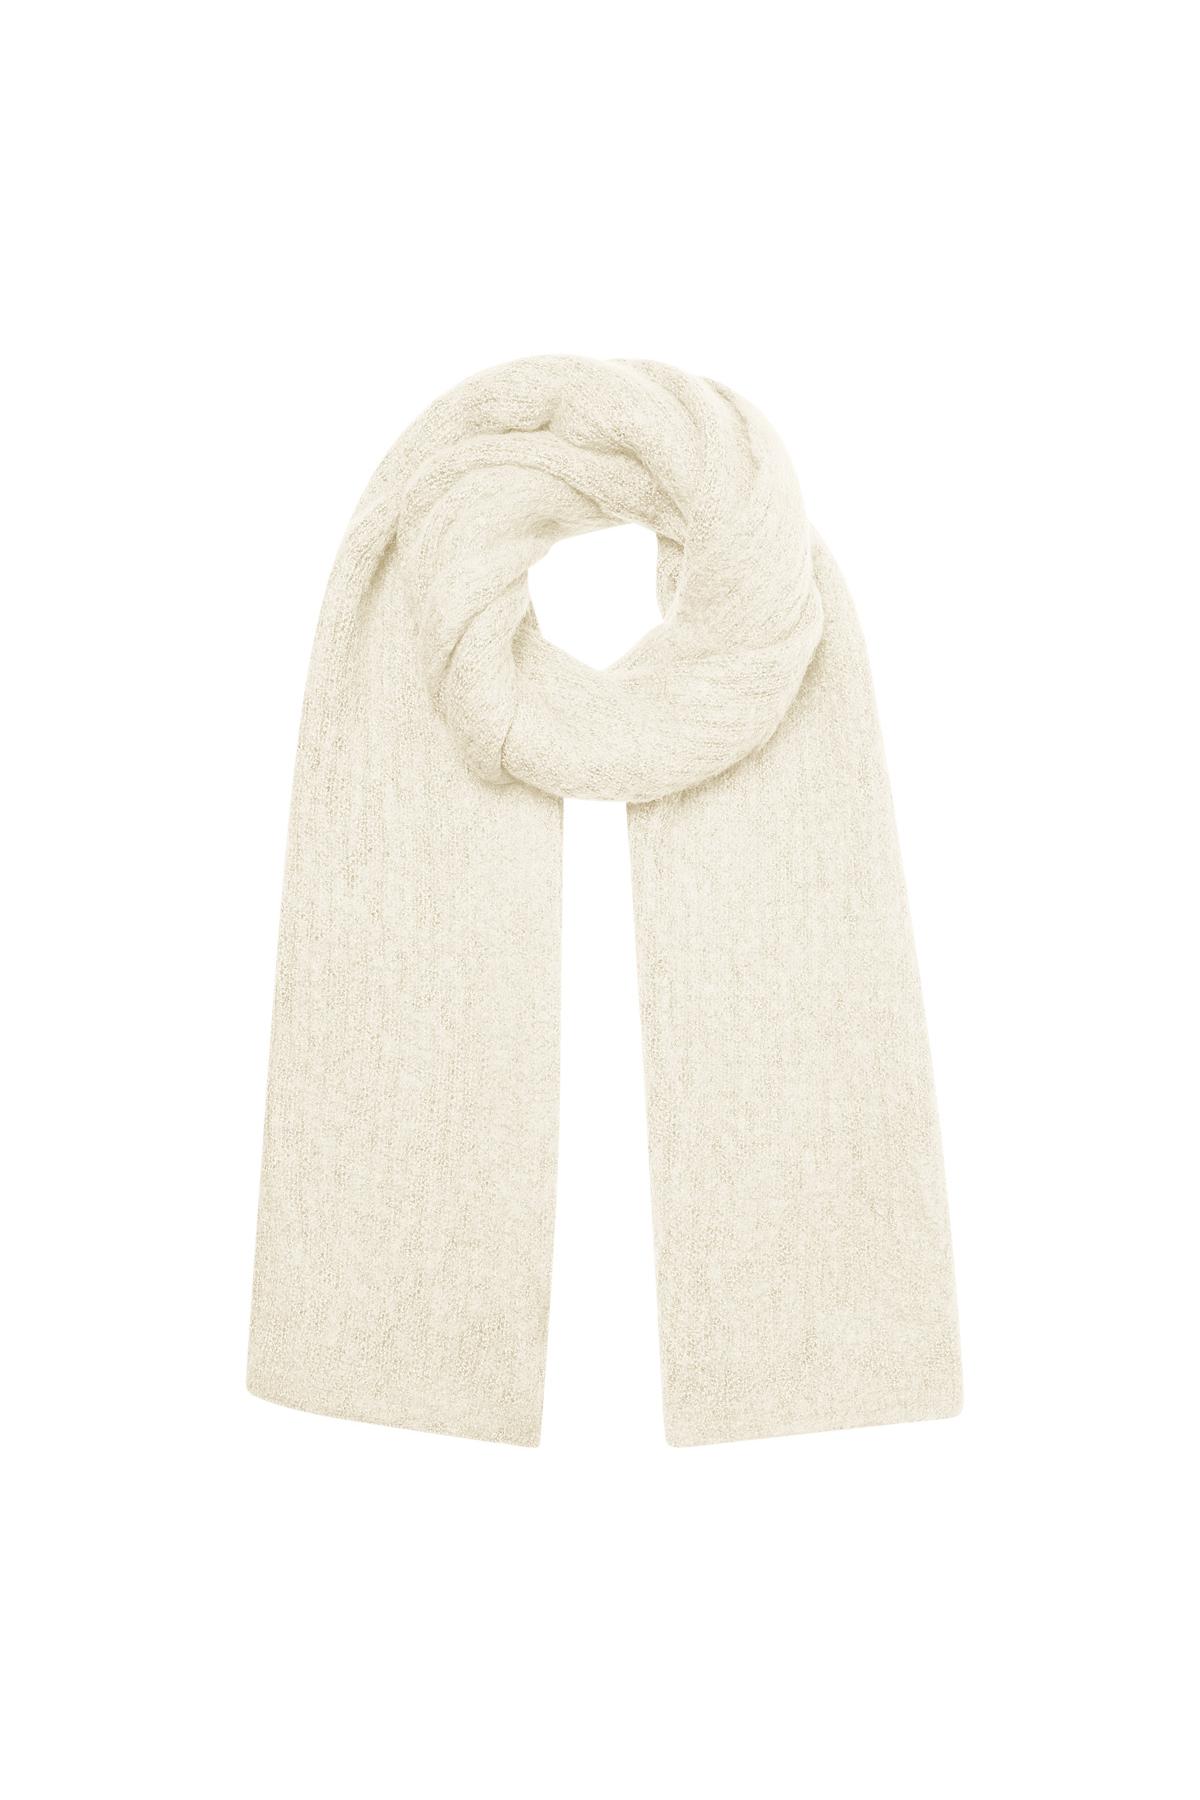 Scarf knitted plain - white h5 